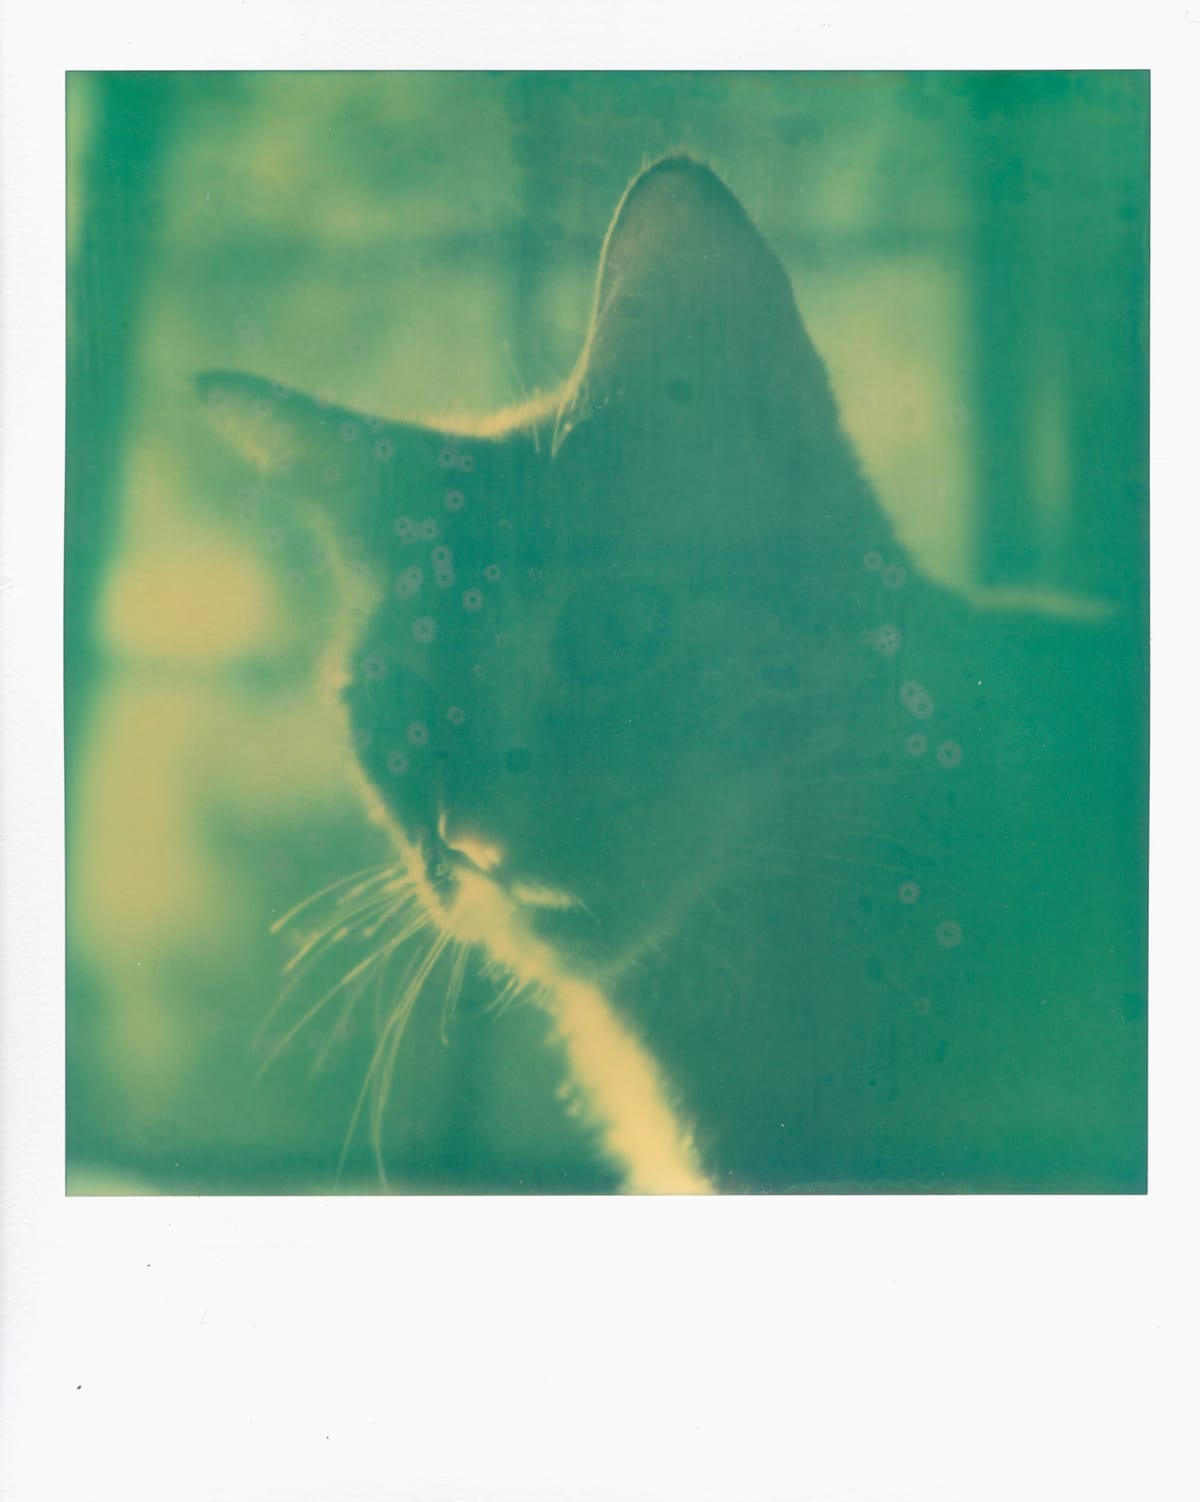 Close up on a cat's face looking off to the left of the camera; expired Polaroid film with aqua and yellow tones